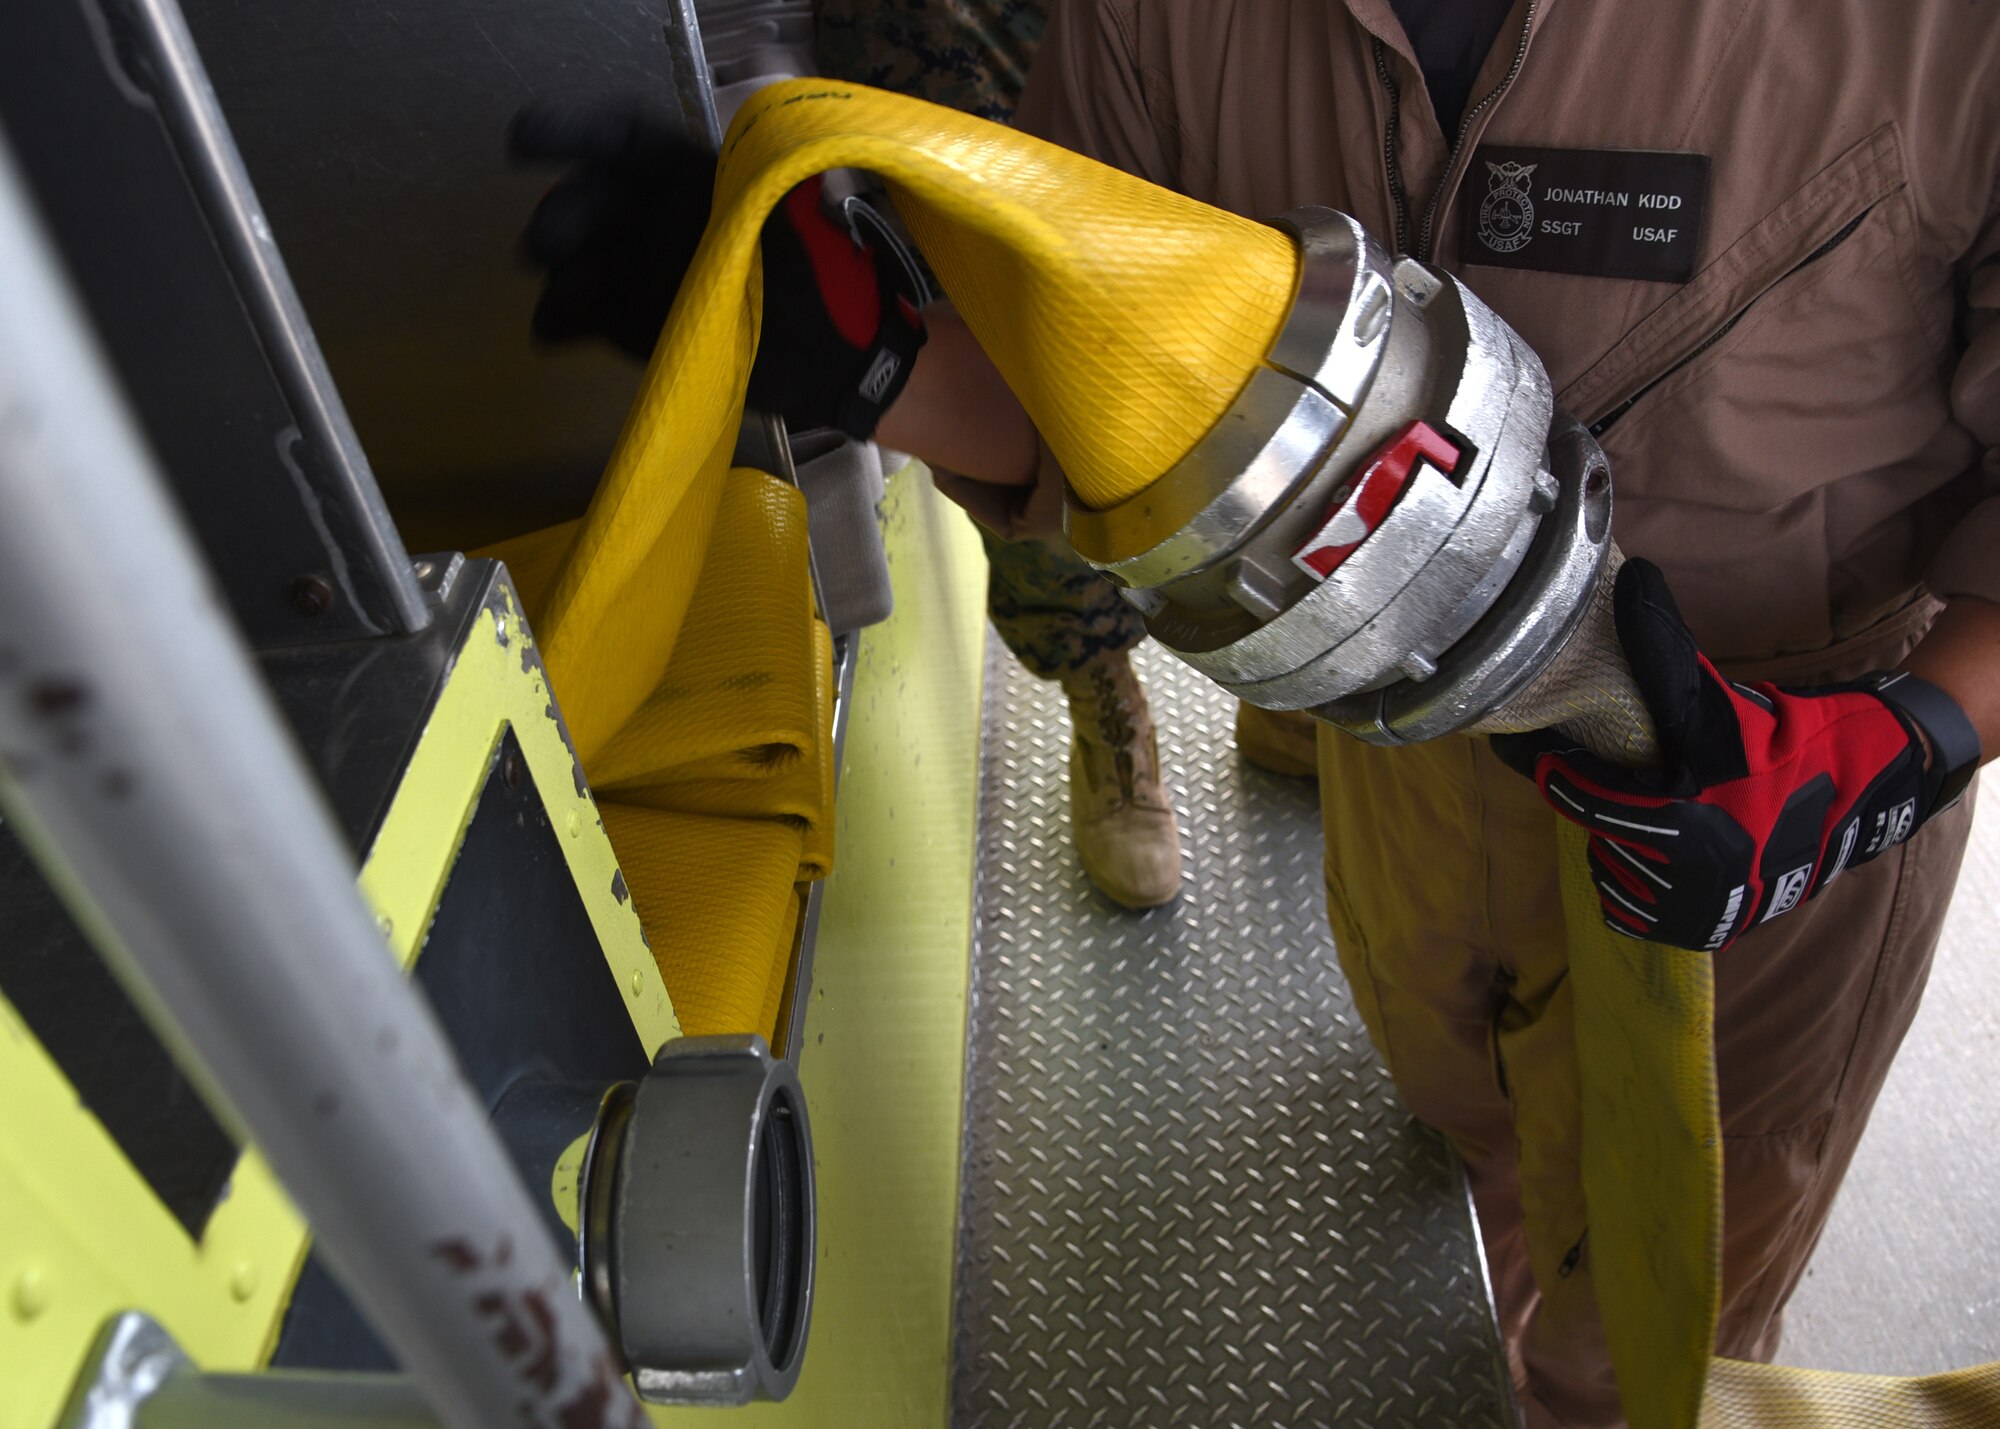 U.S. Air Force Staff Sgt. Jonathan Kidd, 312th Training Squadron instructor, demonstrates how to fold a fire hose coupling correctly into the back of a fire truck outside the Louis F. Garland Department of Defense Fire Academy on Goodfellow Air Force Base, Texas, July 11, 2019. Kidd emphasized that personal integrity is needed to store the fire hose not only correctly, but neatly and orderly as the hoses will be visible on the back of the fire truck by all of the base. (U.S. Air Force Photo by Airman 1st Class Abbey Rieves/Released)